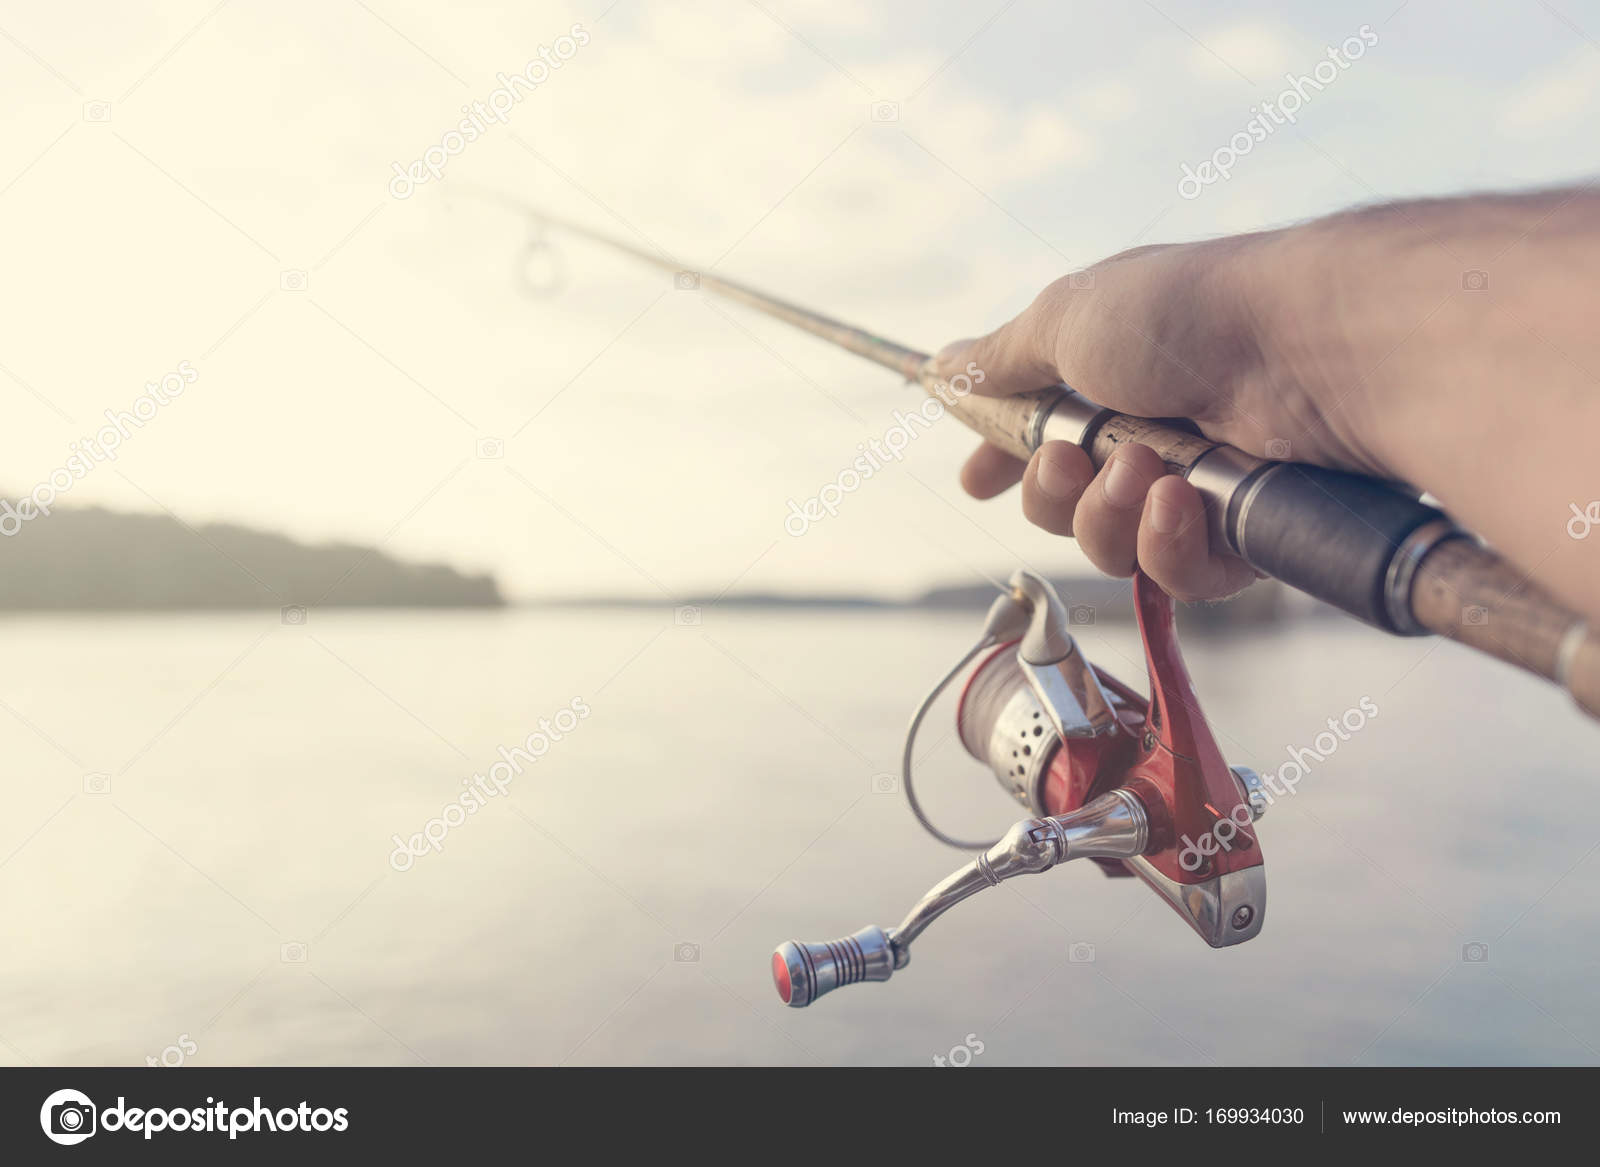 Fishing rod and reel hand holding. Shallow depth of field — Stock Photo ©  Allexxandar #169934030